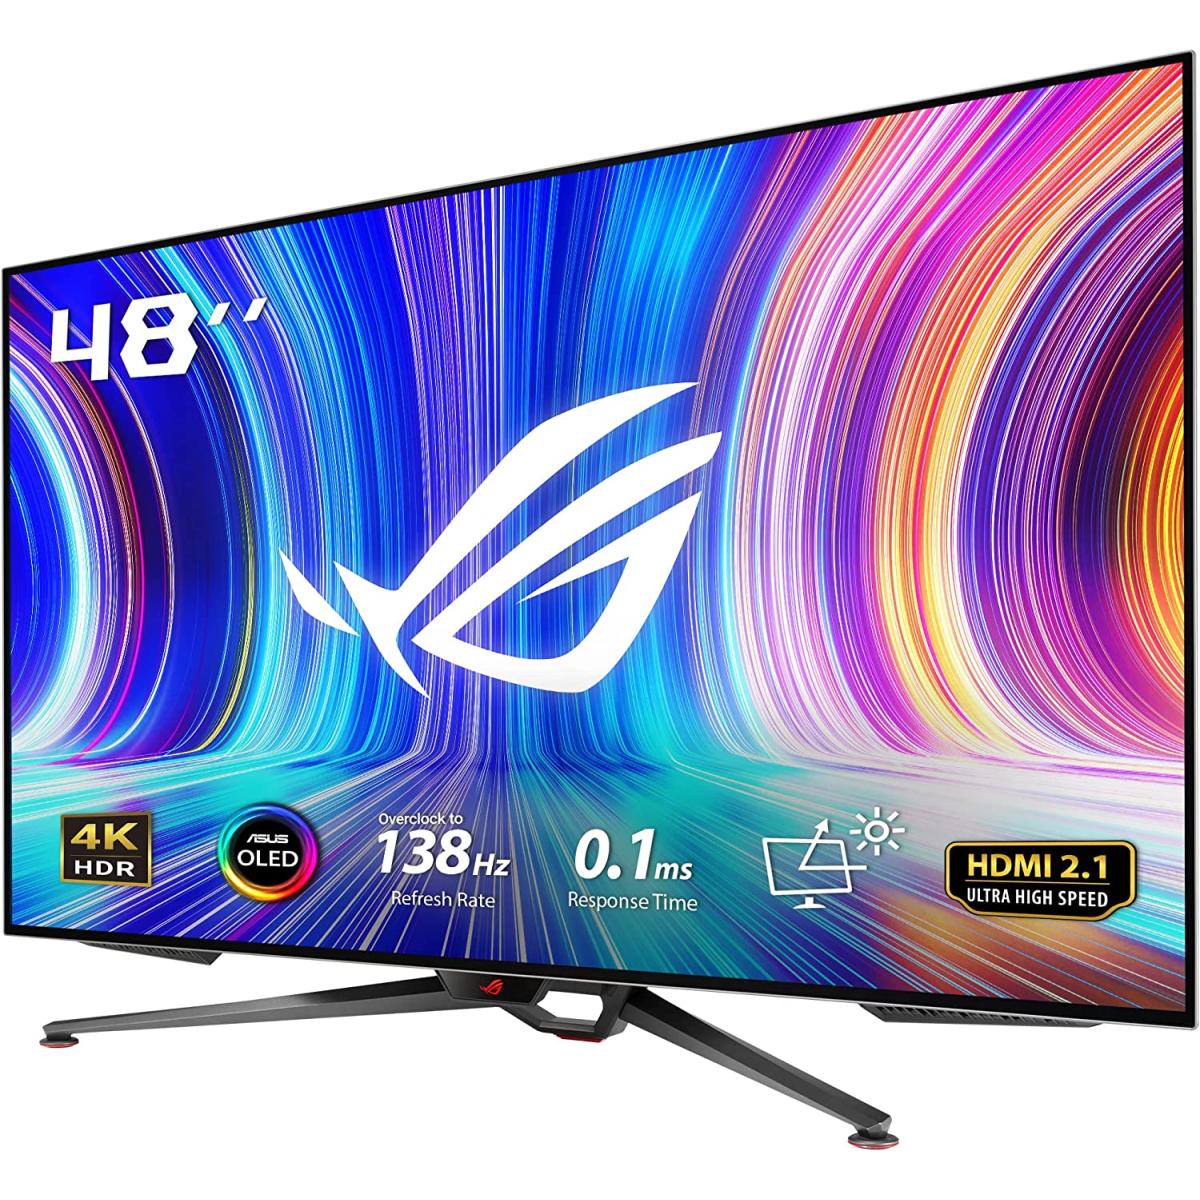 ASUS ROG Swift PG48UQ 48”4K OLED 138Hz 0.1ms HDMI 2.1 True 10 bit DCI-P3 98% G-SYNC Compatible Console Ready & Remote Control